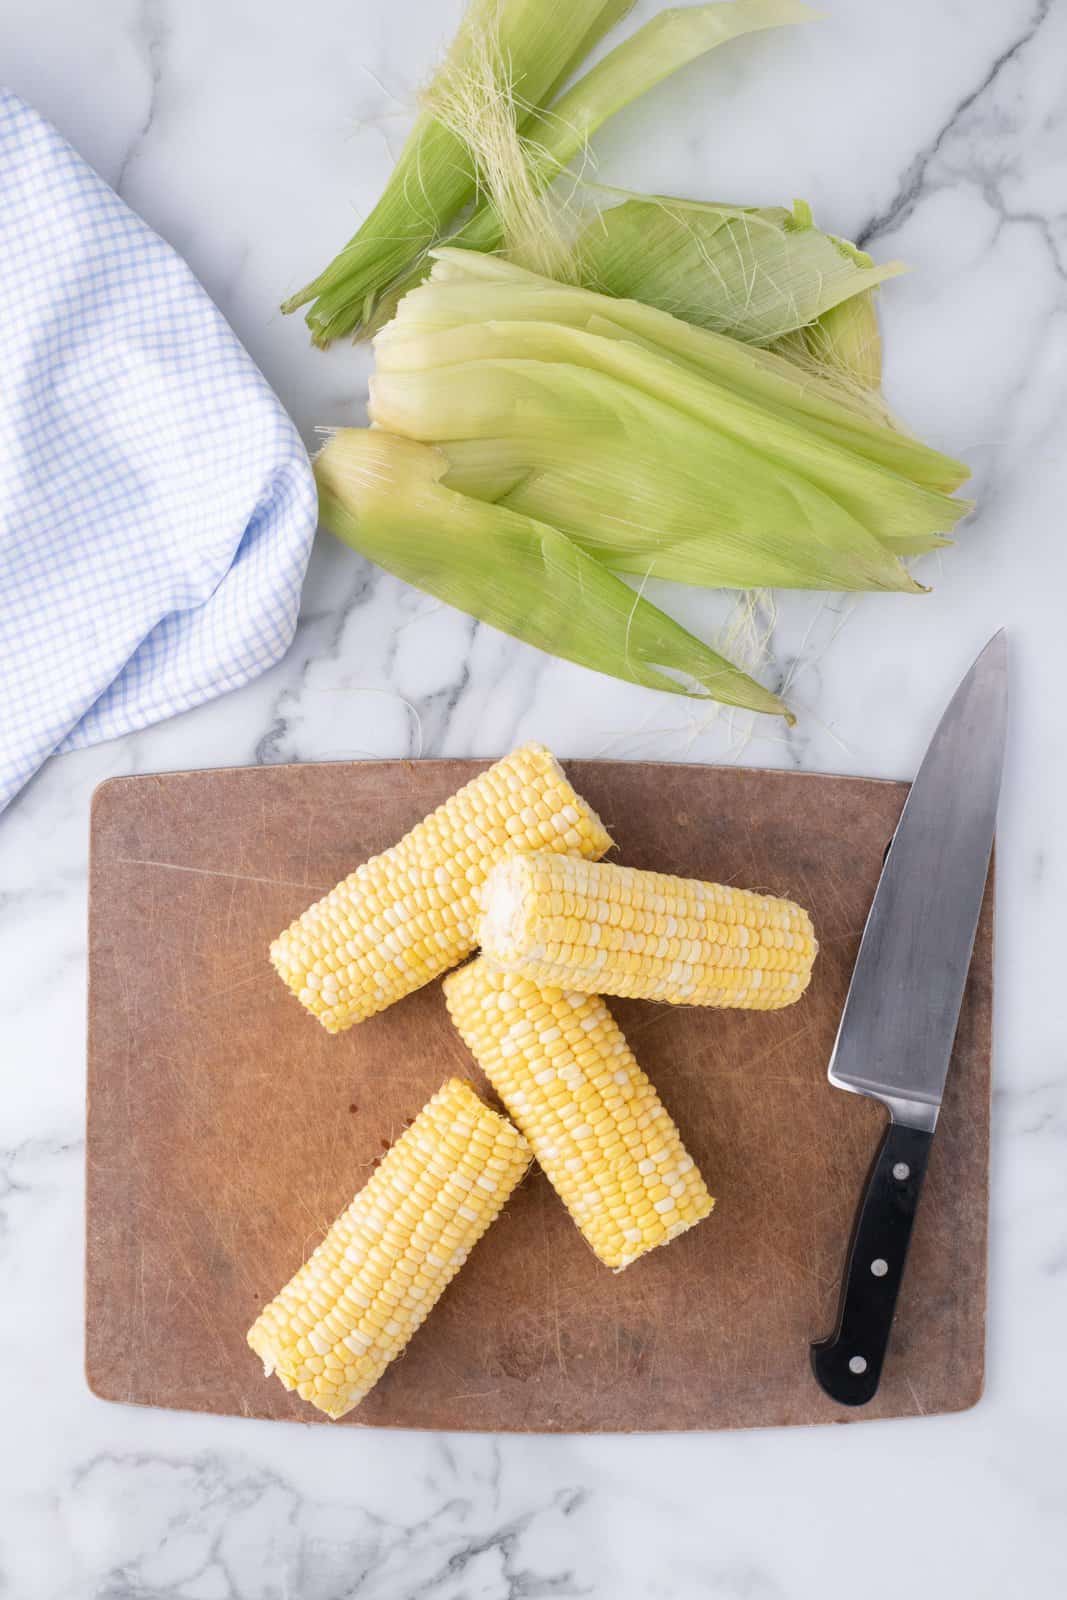 Trimmed ears of corn on a cutting board with knife and corn husks.